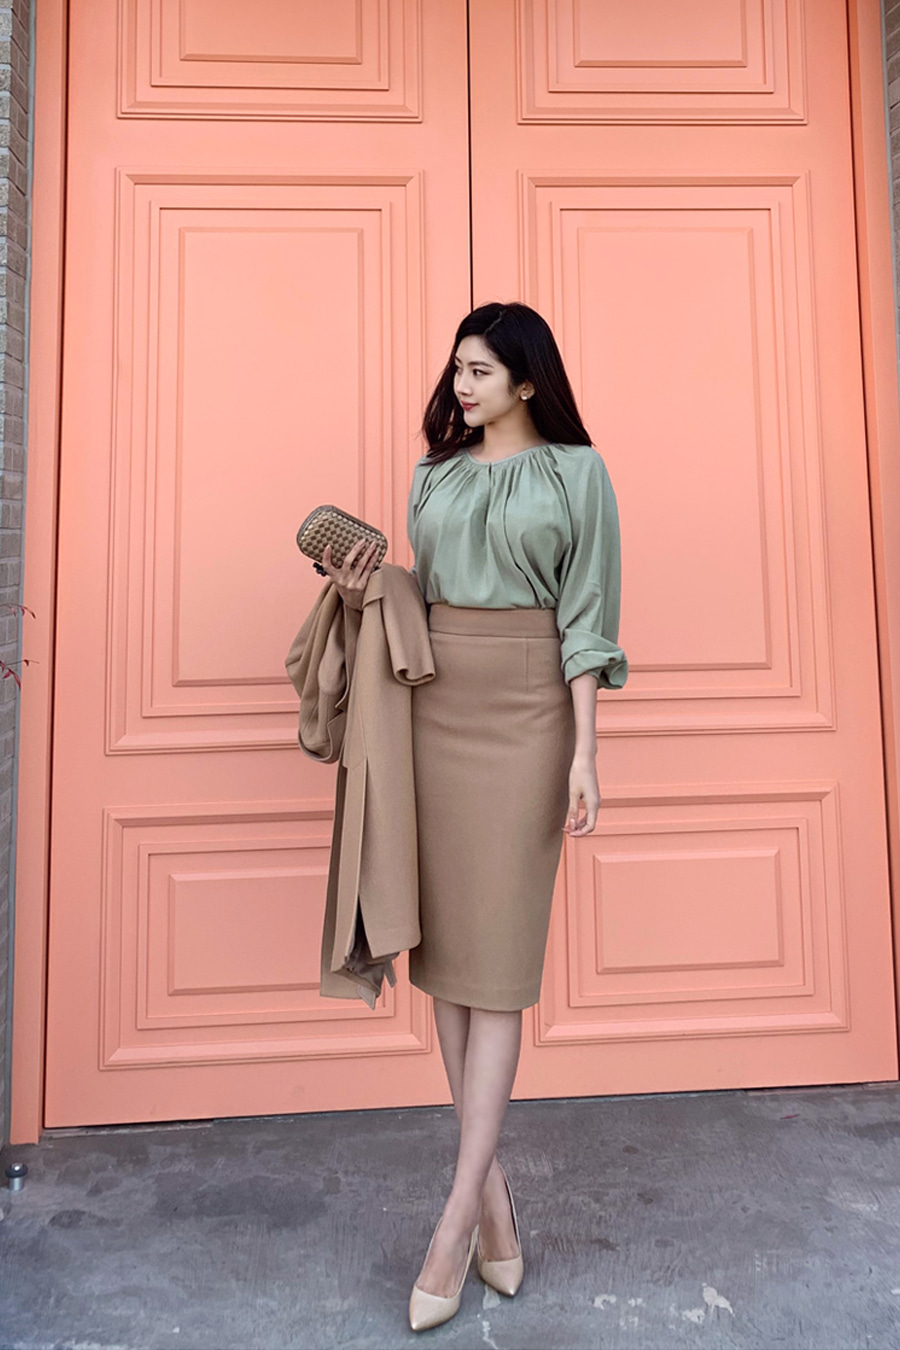 [RCSSK04BE] Dolce marni pencil skirt